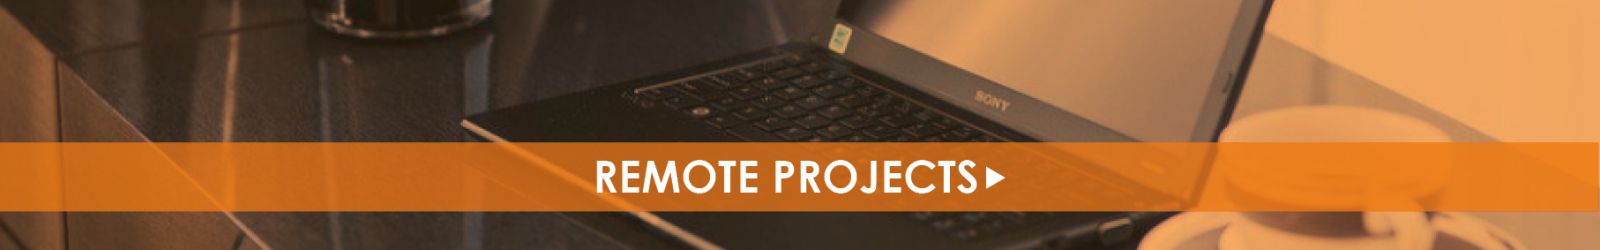 Remote projects